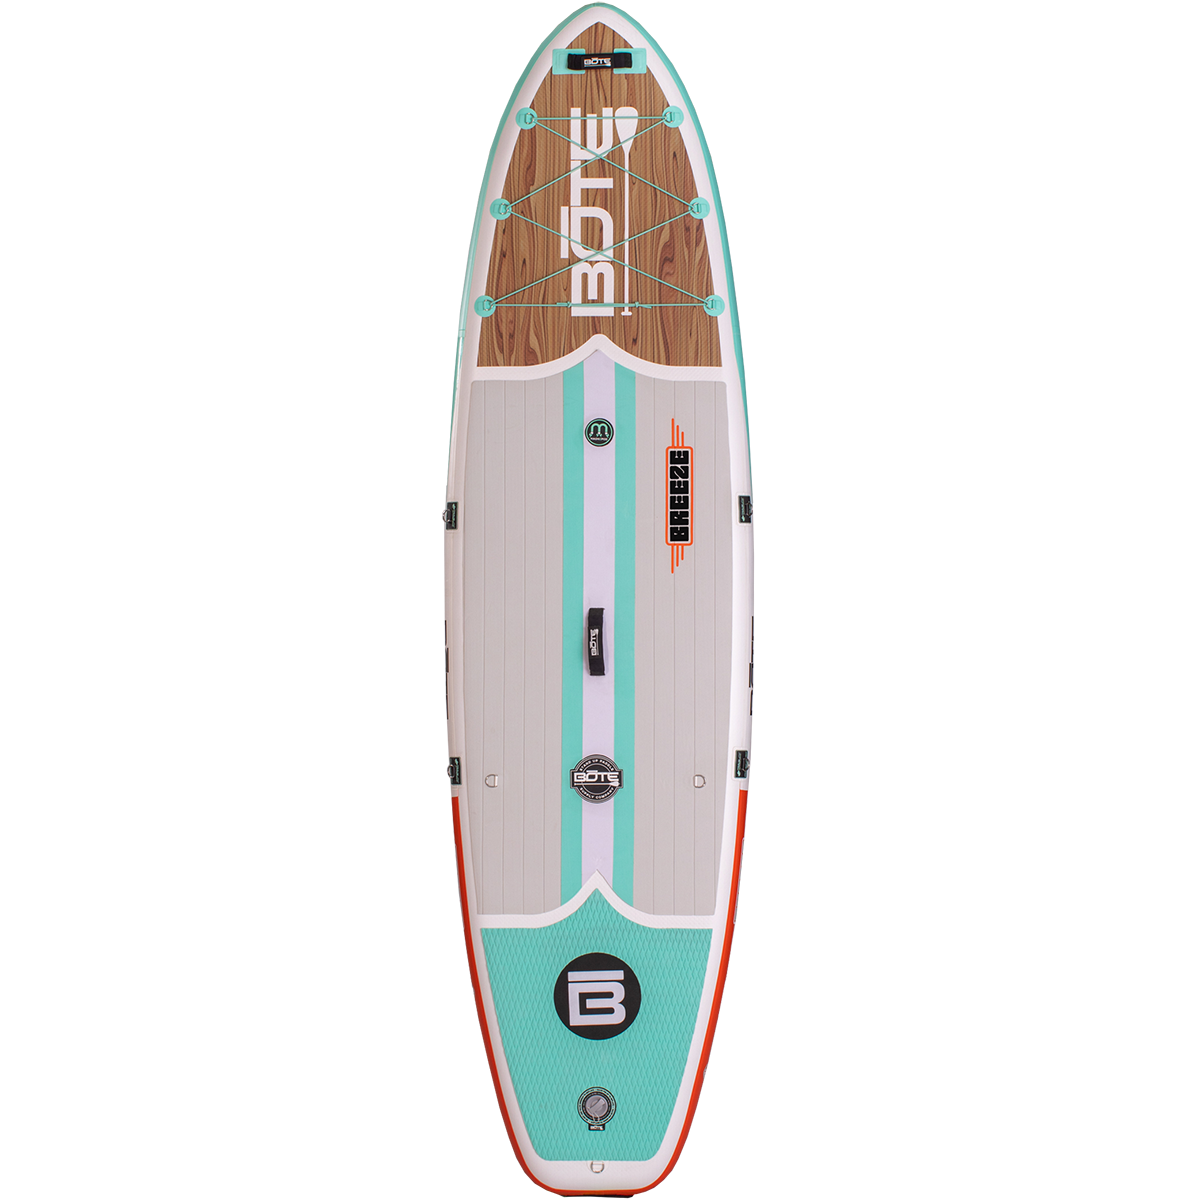 Breeze Aero Classic 11'6 Inflatable Paddle Board alternate view